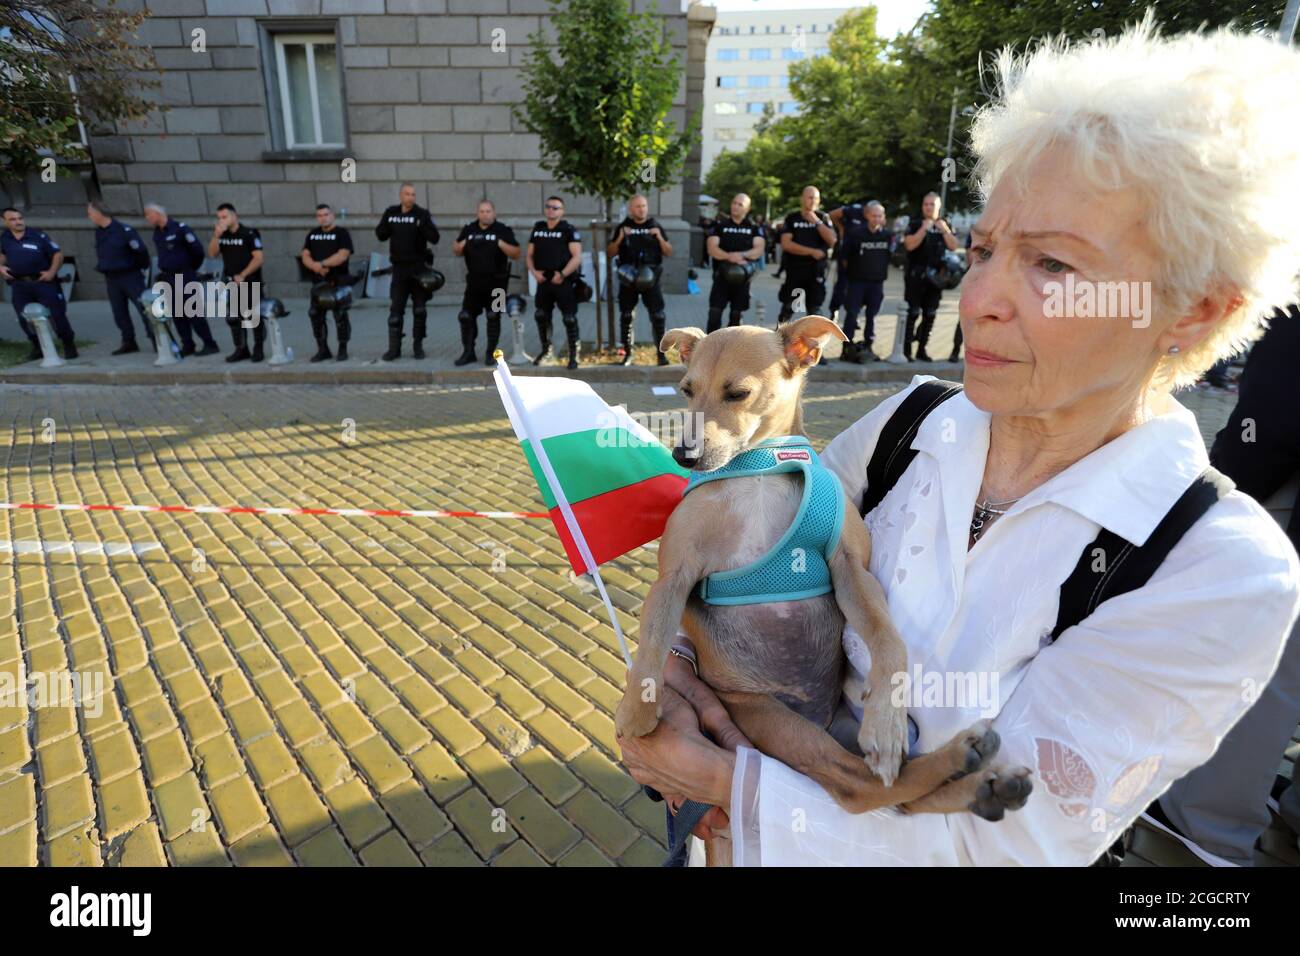 September 10, Sofia, Bulgaria: 64th day of protests against the mafia, the government and Attorney General Ivan Geshev. People unroll the Bulgarian fl Stock Photo